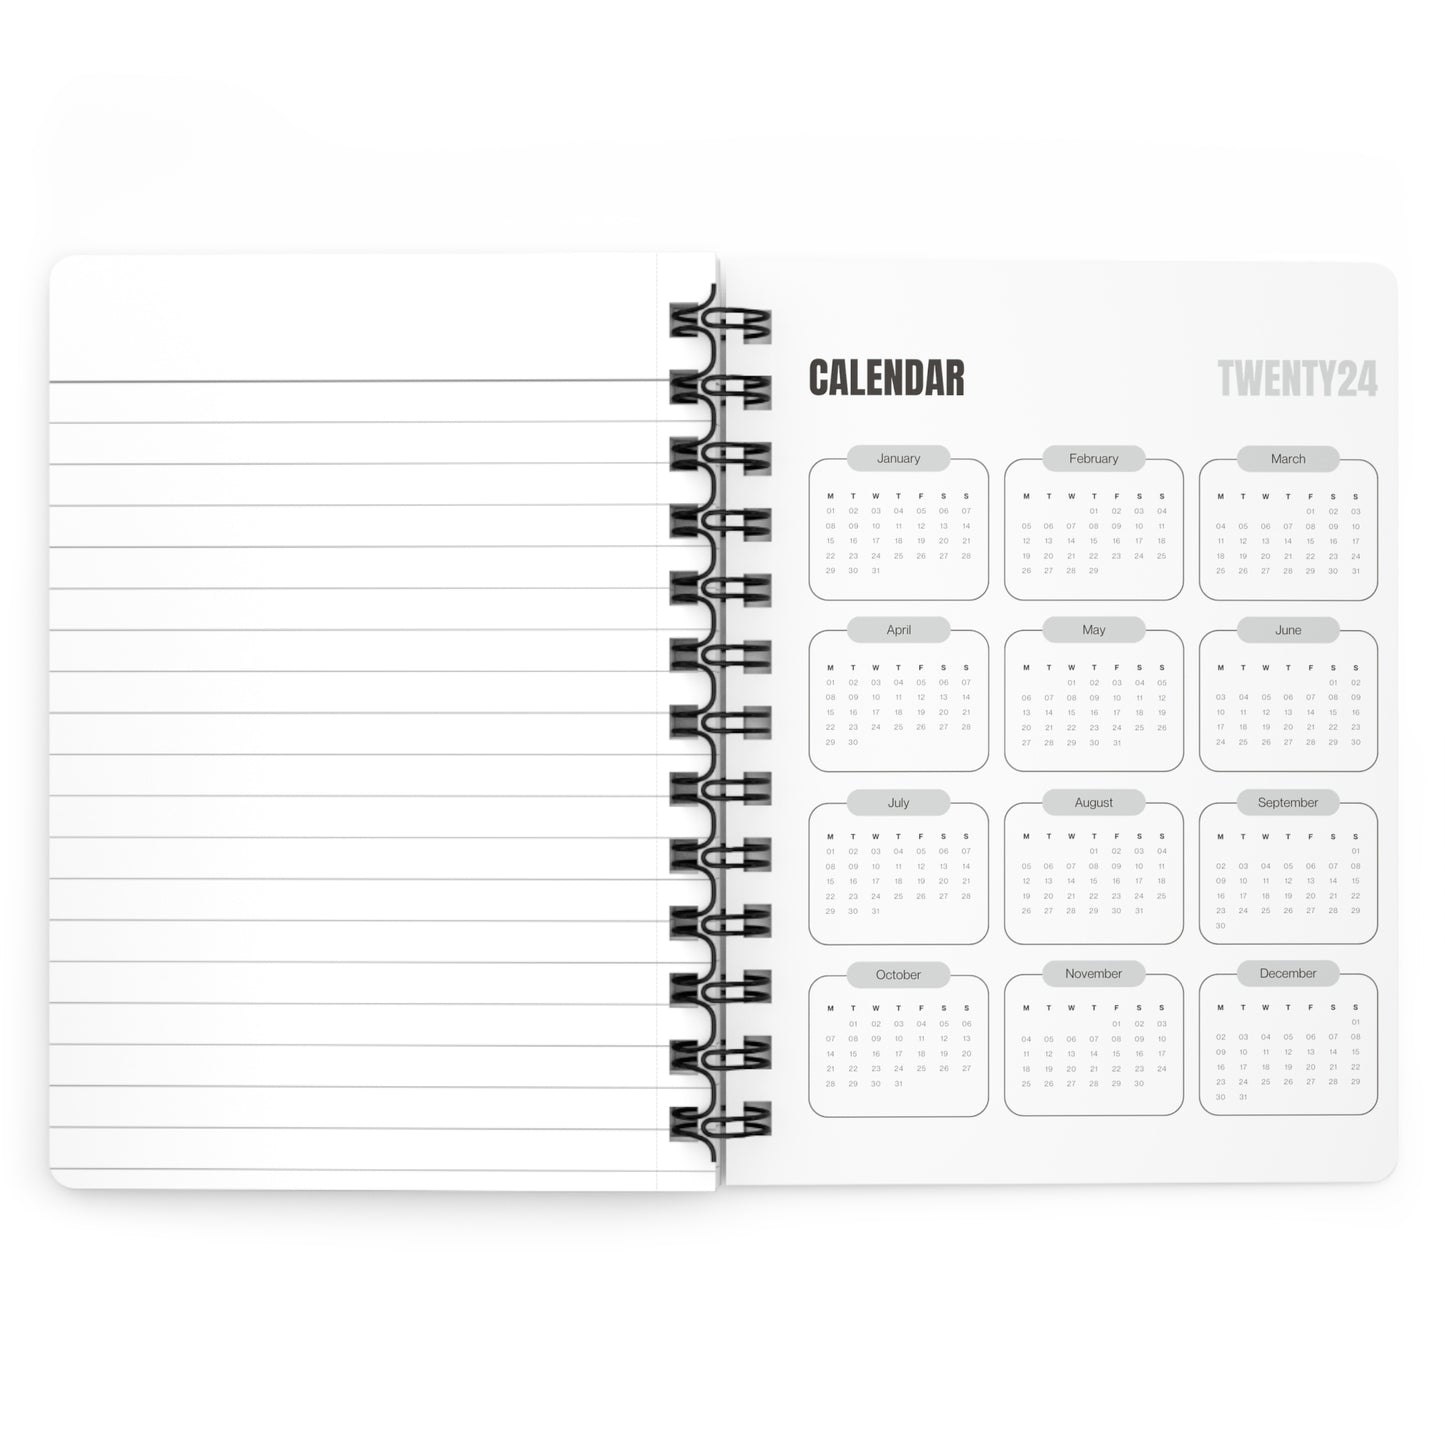 Lovely Flower Spiral Bound Notebooks and Journals with 2023-2024 Year-at-a-Glance Calendar